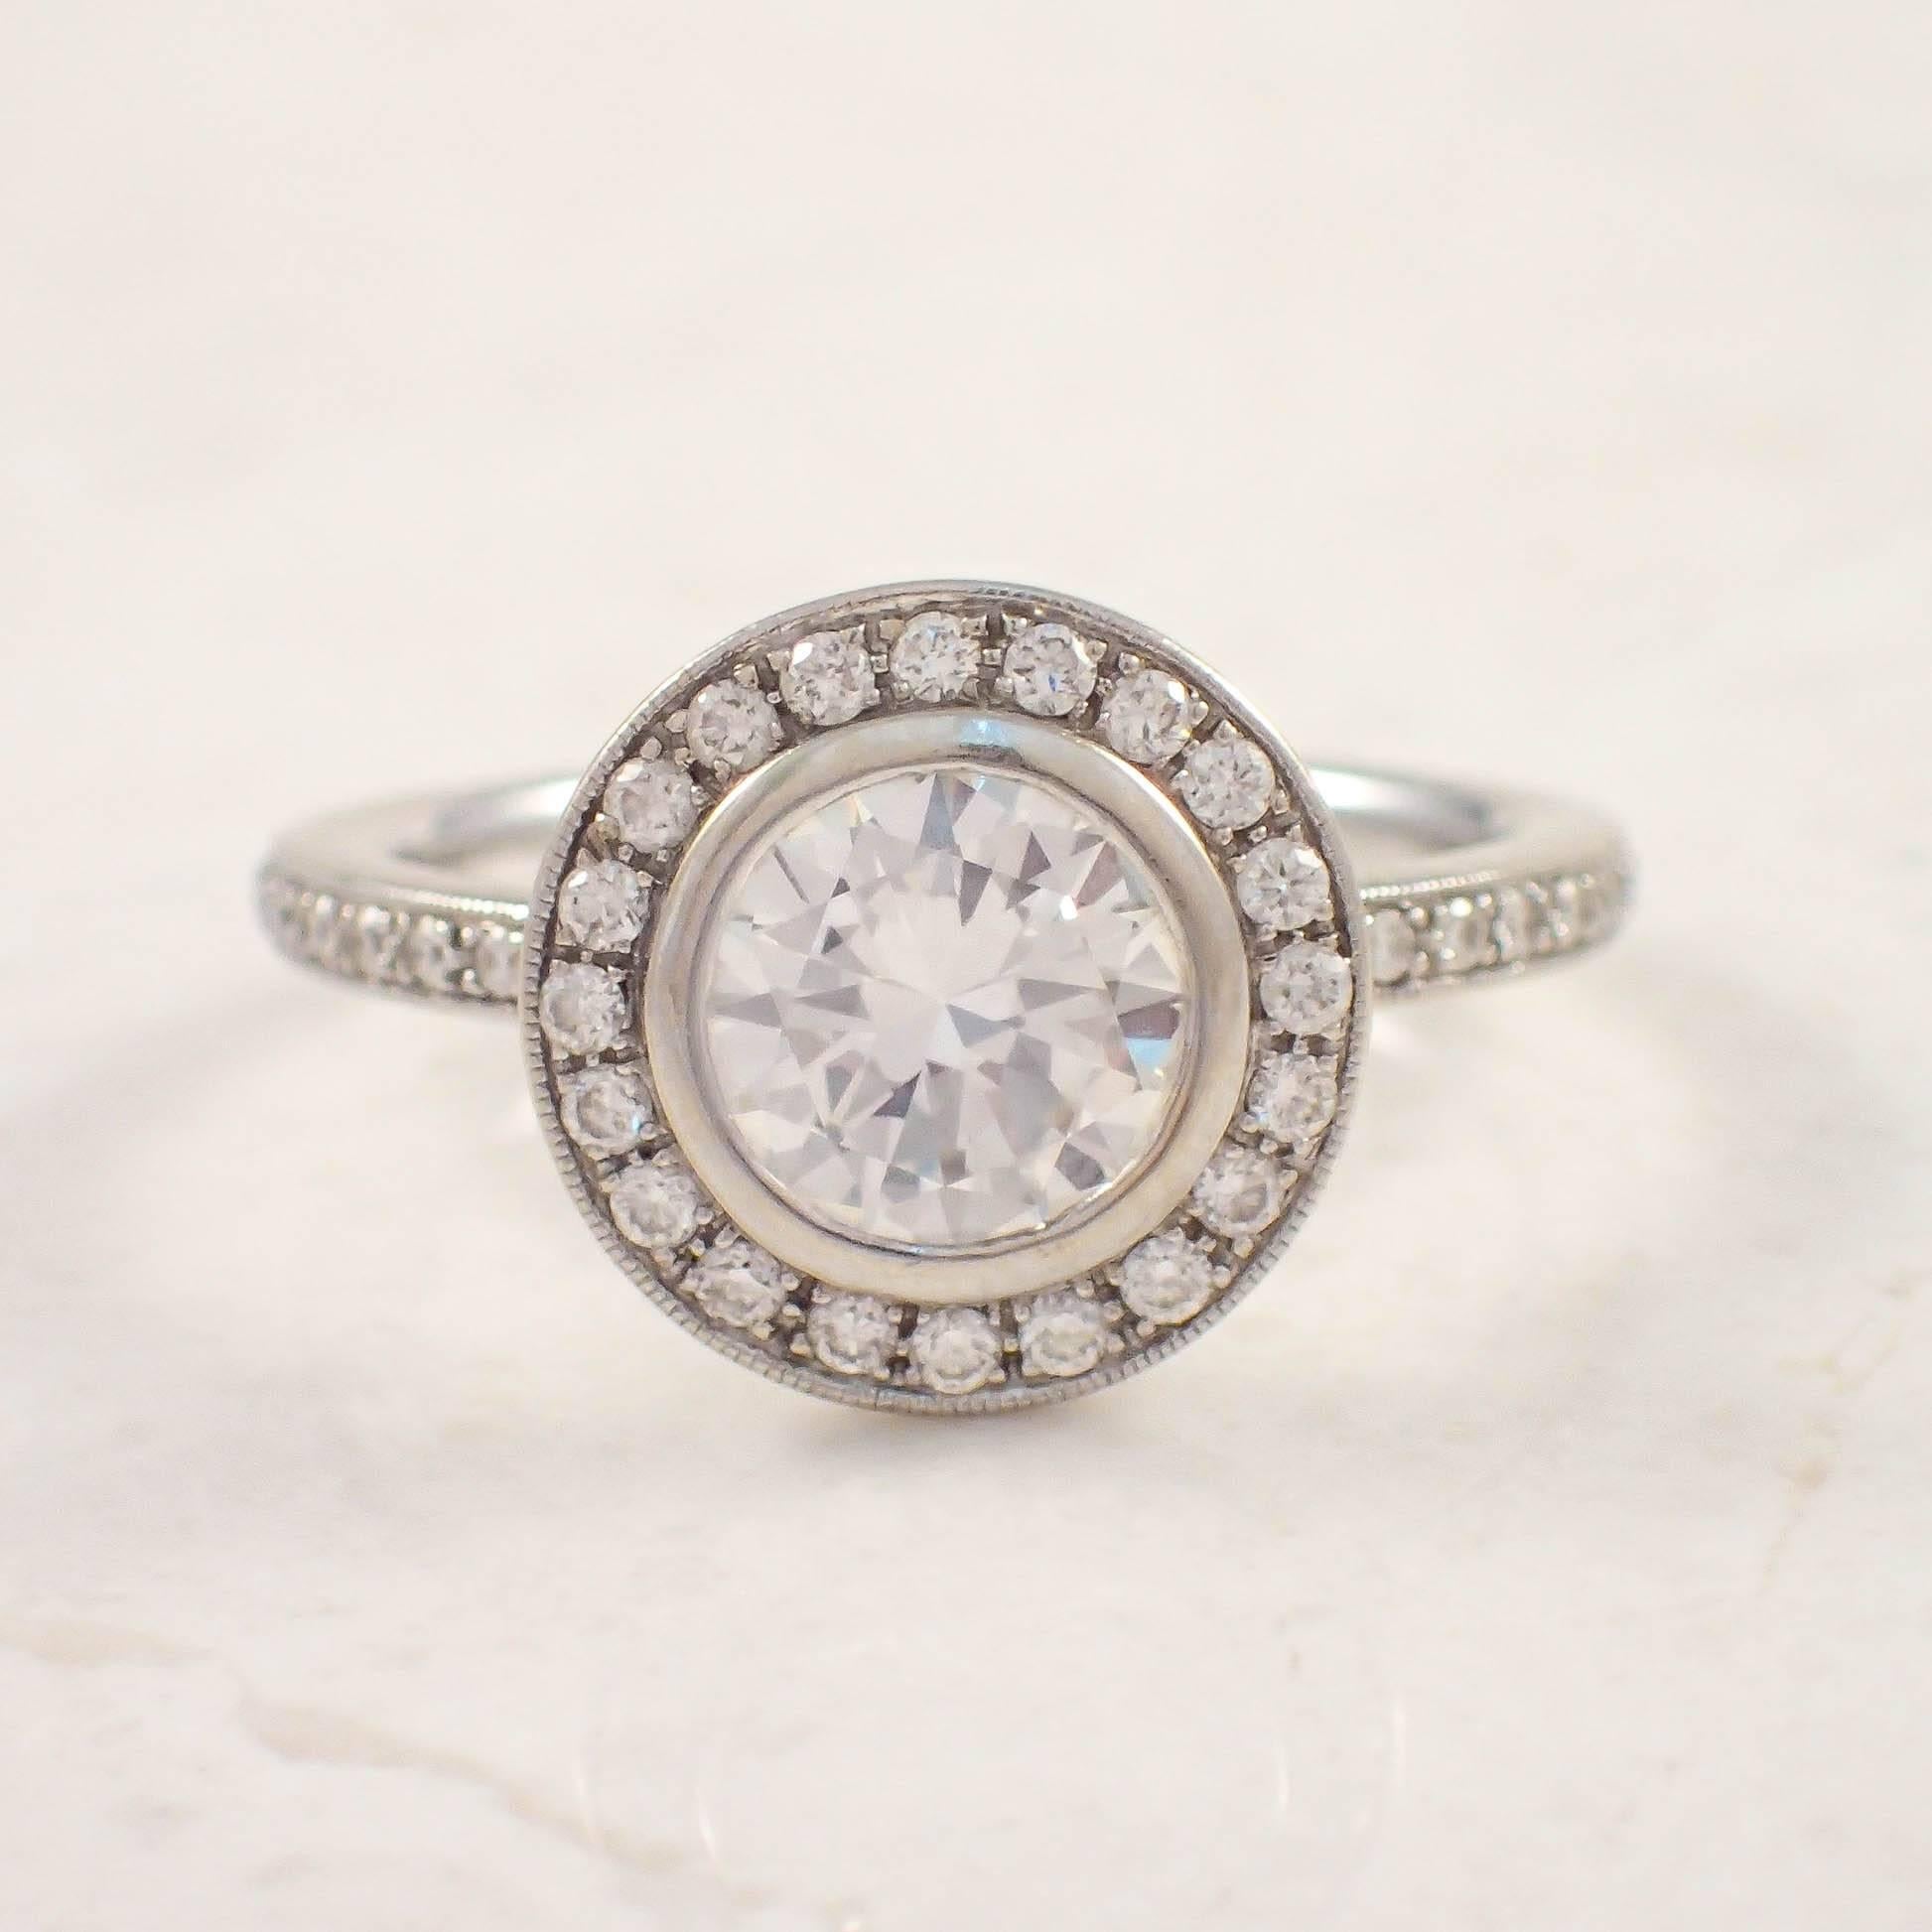 14K White gold diamond engagement ring. The cluster style ring is centered with a GIA certified, 1.00 carat round diamond accented by 38 small round diamonds weighing approximately .30 carat total. The ring weighs 2.3 DWTs/ 3.5 grams. Size 6.

GIA